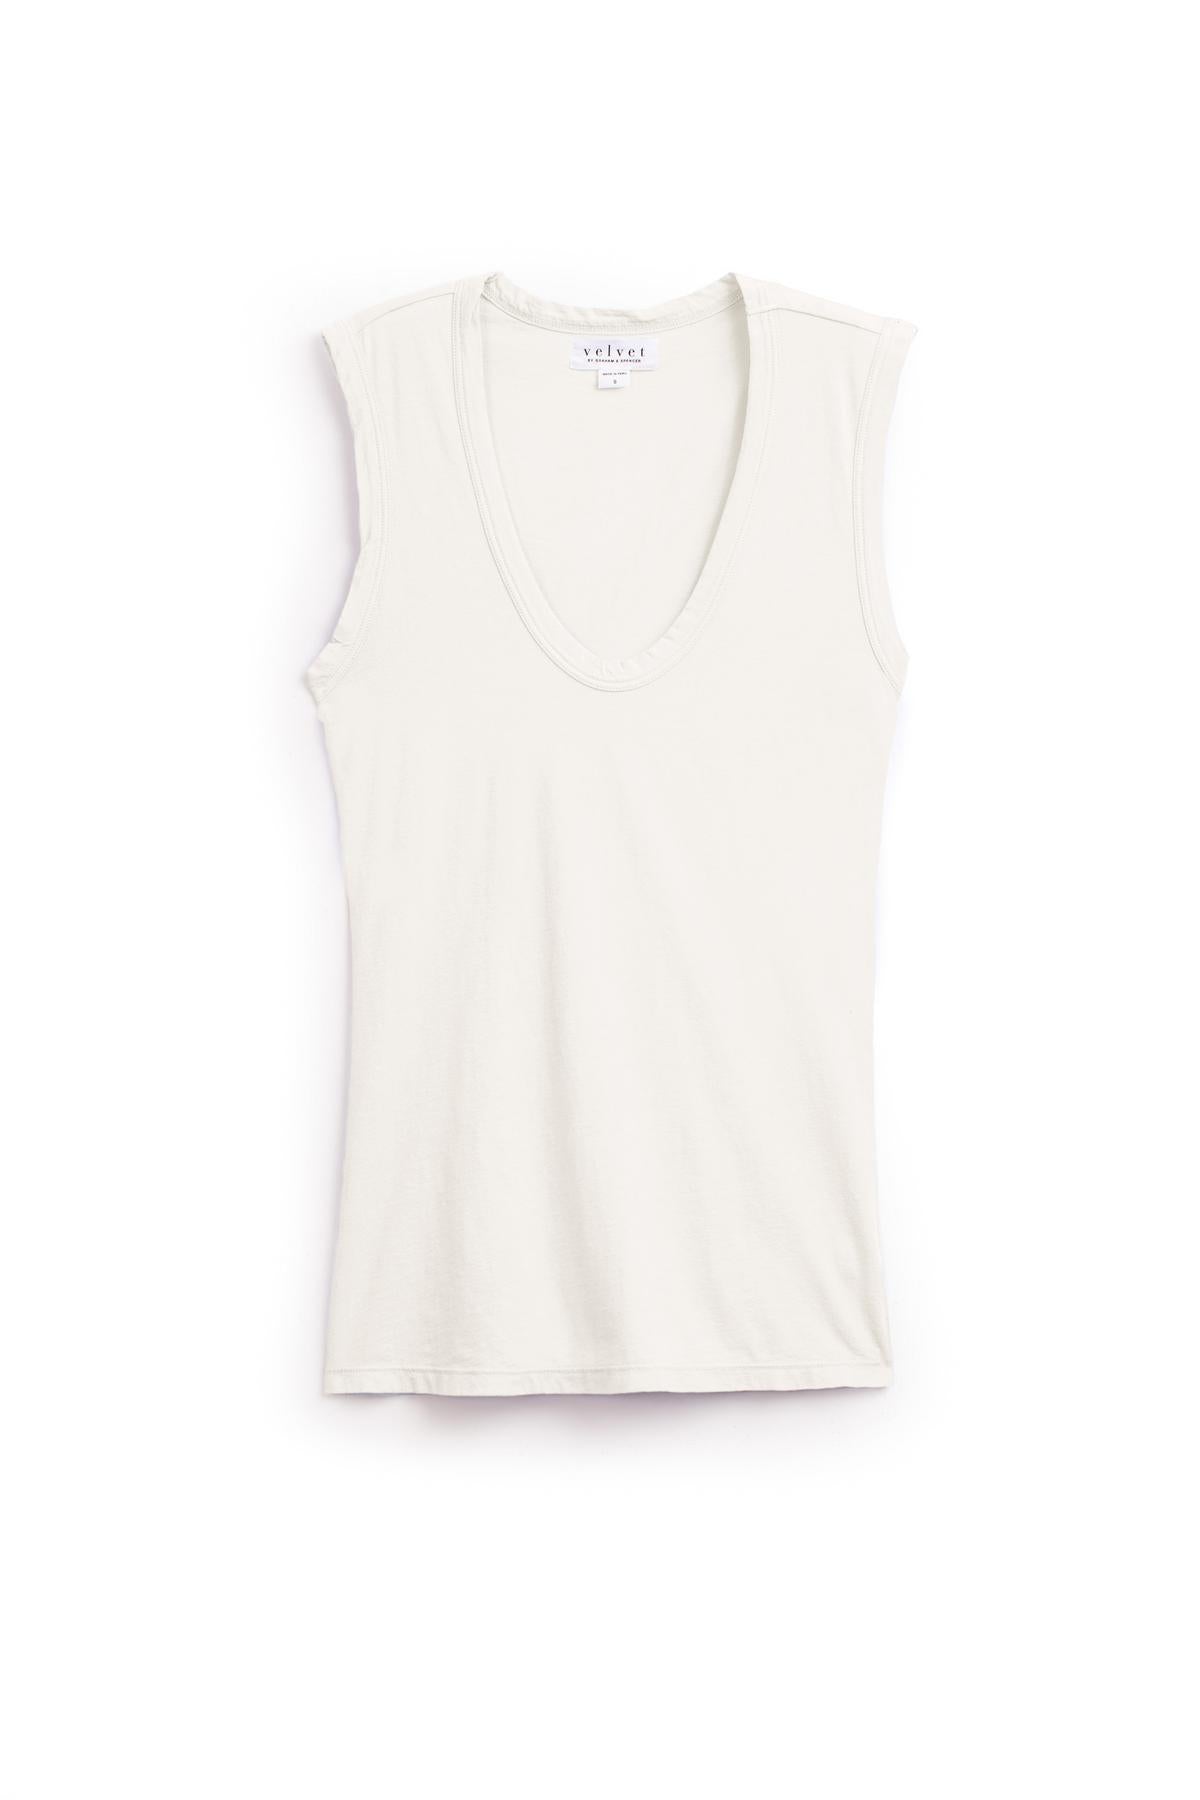   White sleeveless laid-back ESTINA TANK TOP with a low-scoop-neck on a plain white background. Brand label 